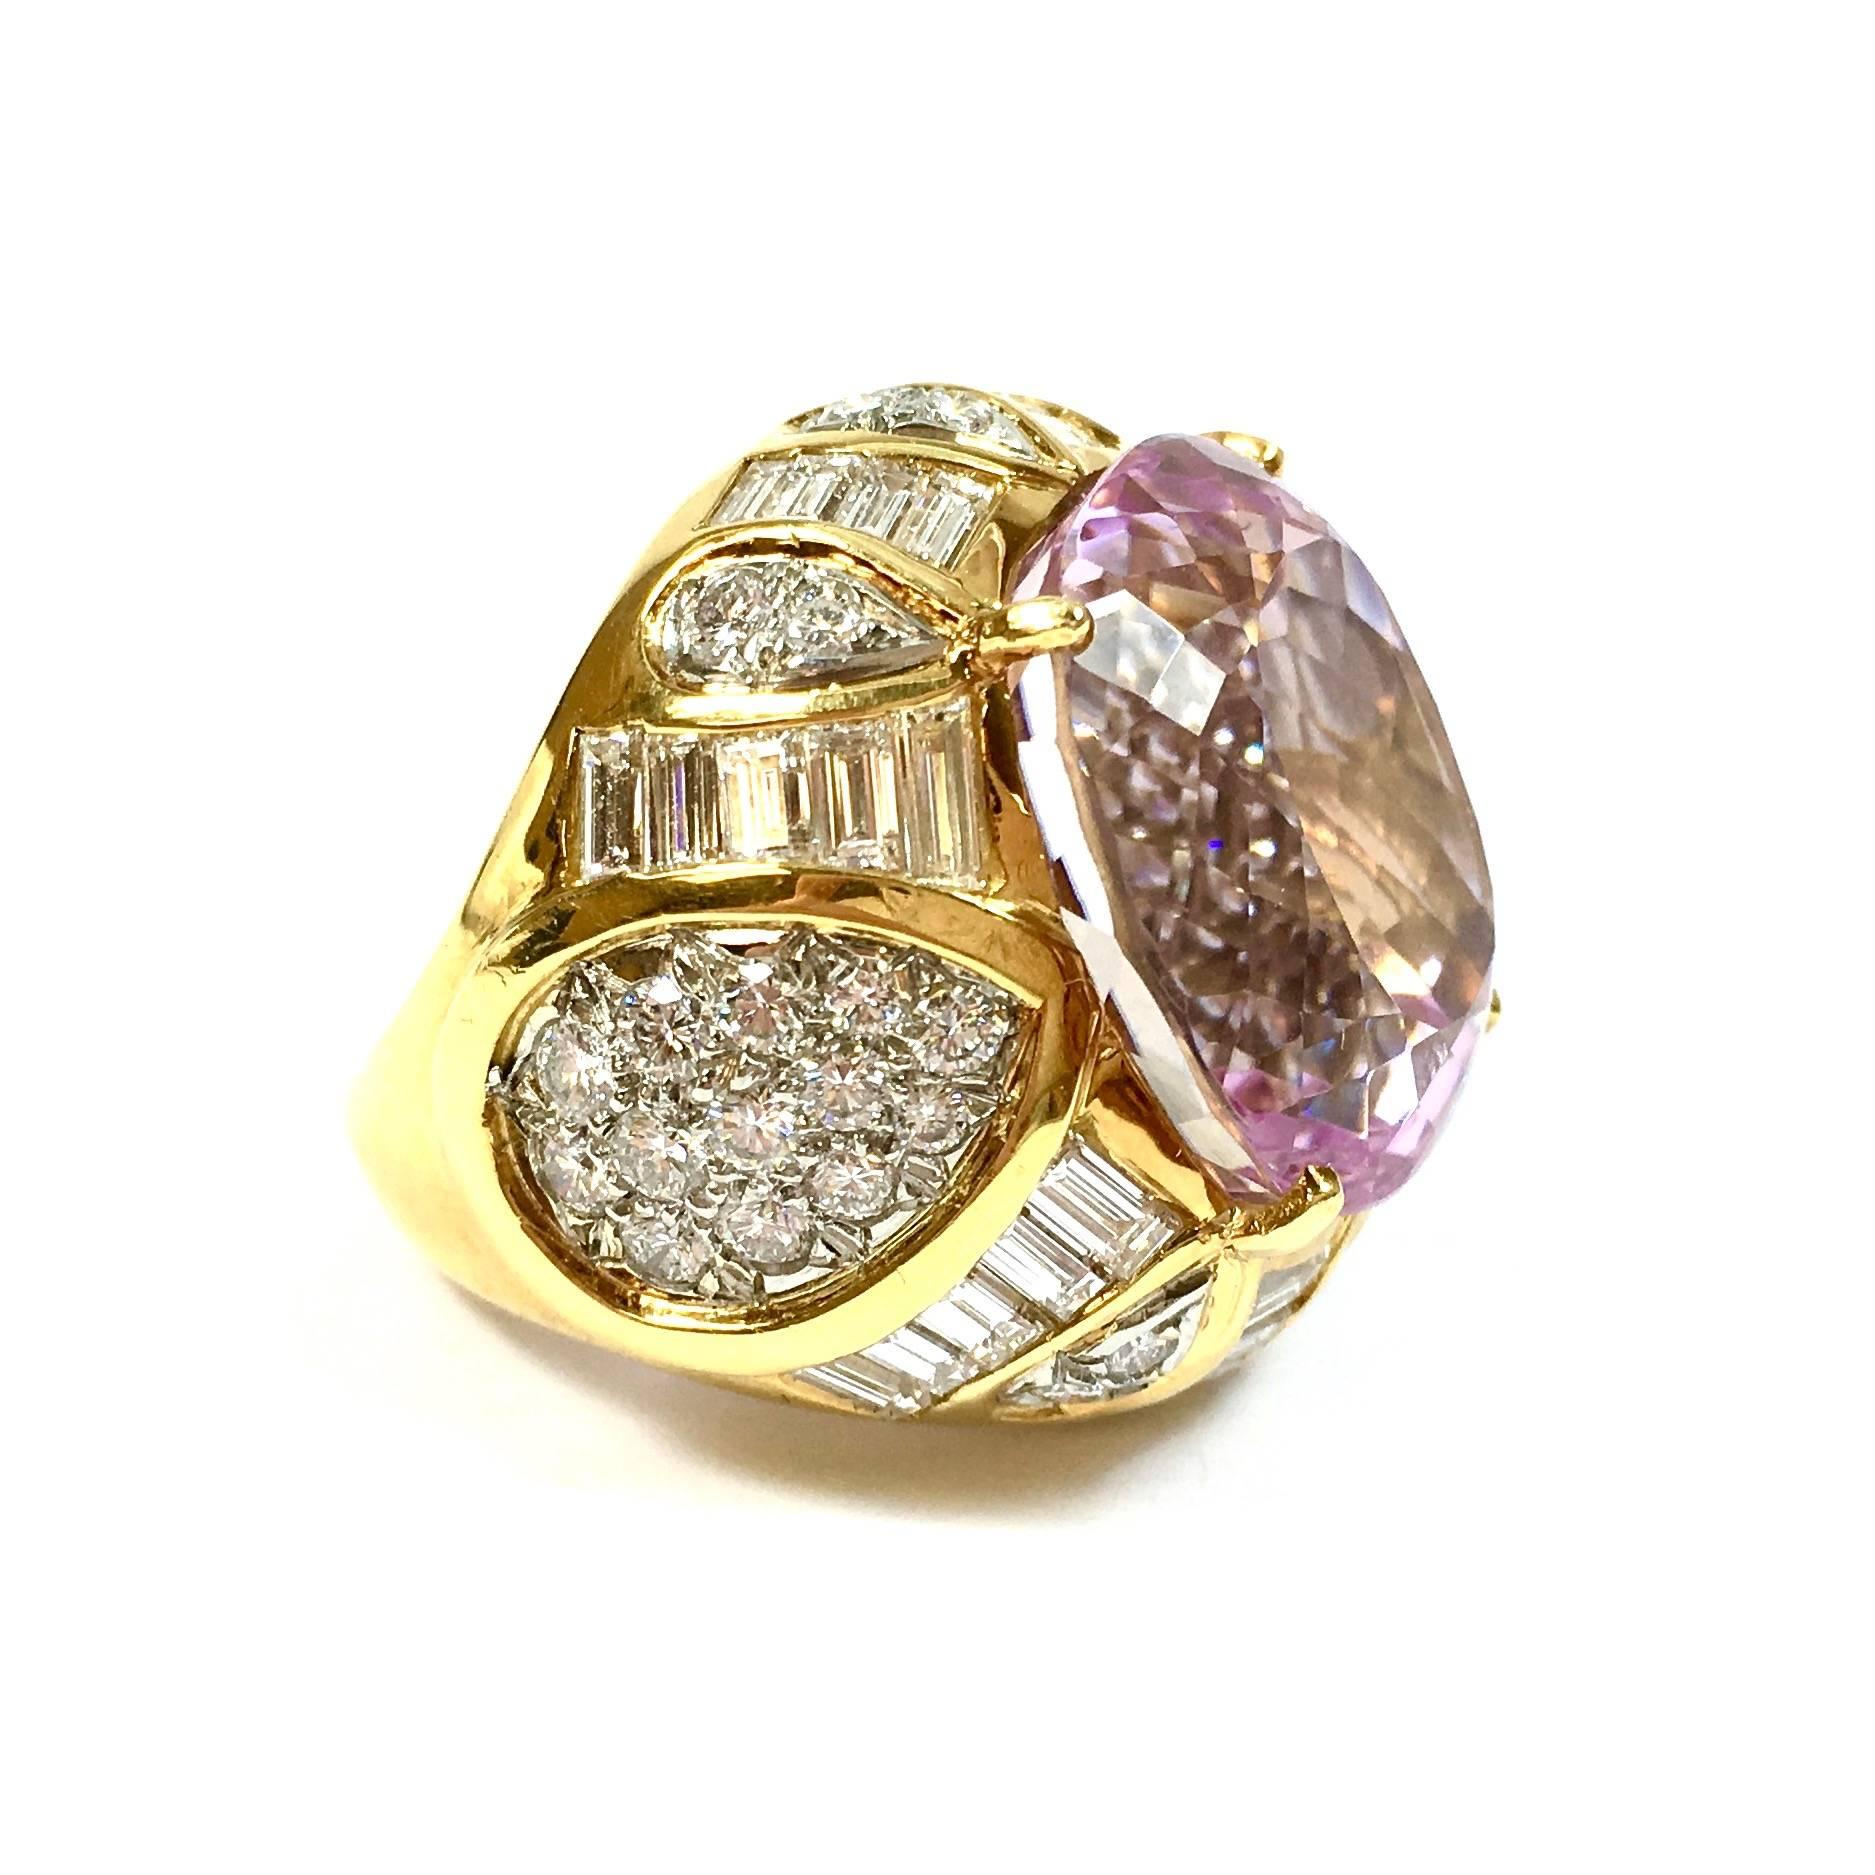 Show stopper ring crafted in 18K gold, featuring an approximately 30ct cushion shaped pastel purplish pink natural kunzite, surrounded by 5.0 carats of diamonds. Color: F-G, Clarity: VS 
The front measures 27 x 25 mm. 
Excellent